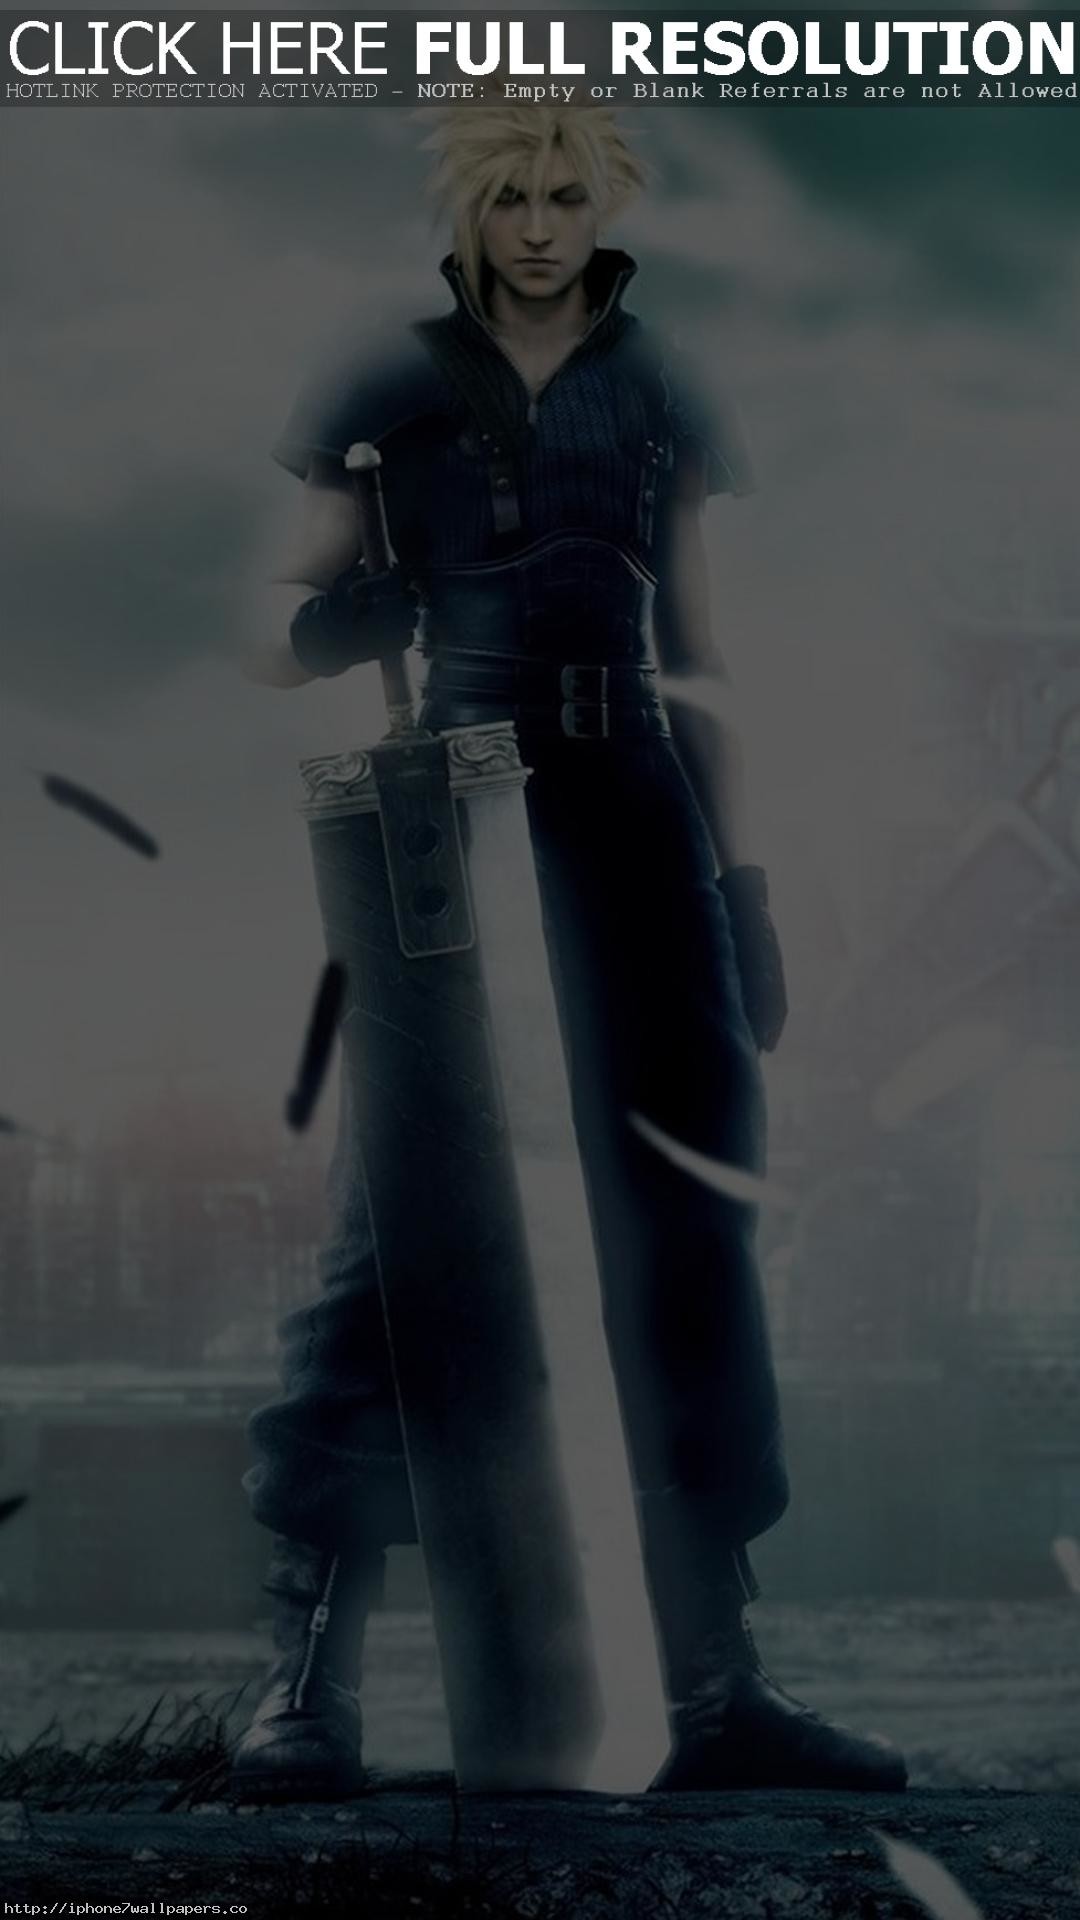 1080x1920 Final Fantasy 7 - Cloud Strife Android wallpaper - Android HD wallpapers